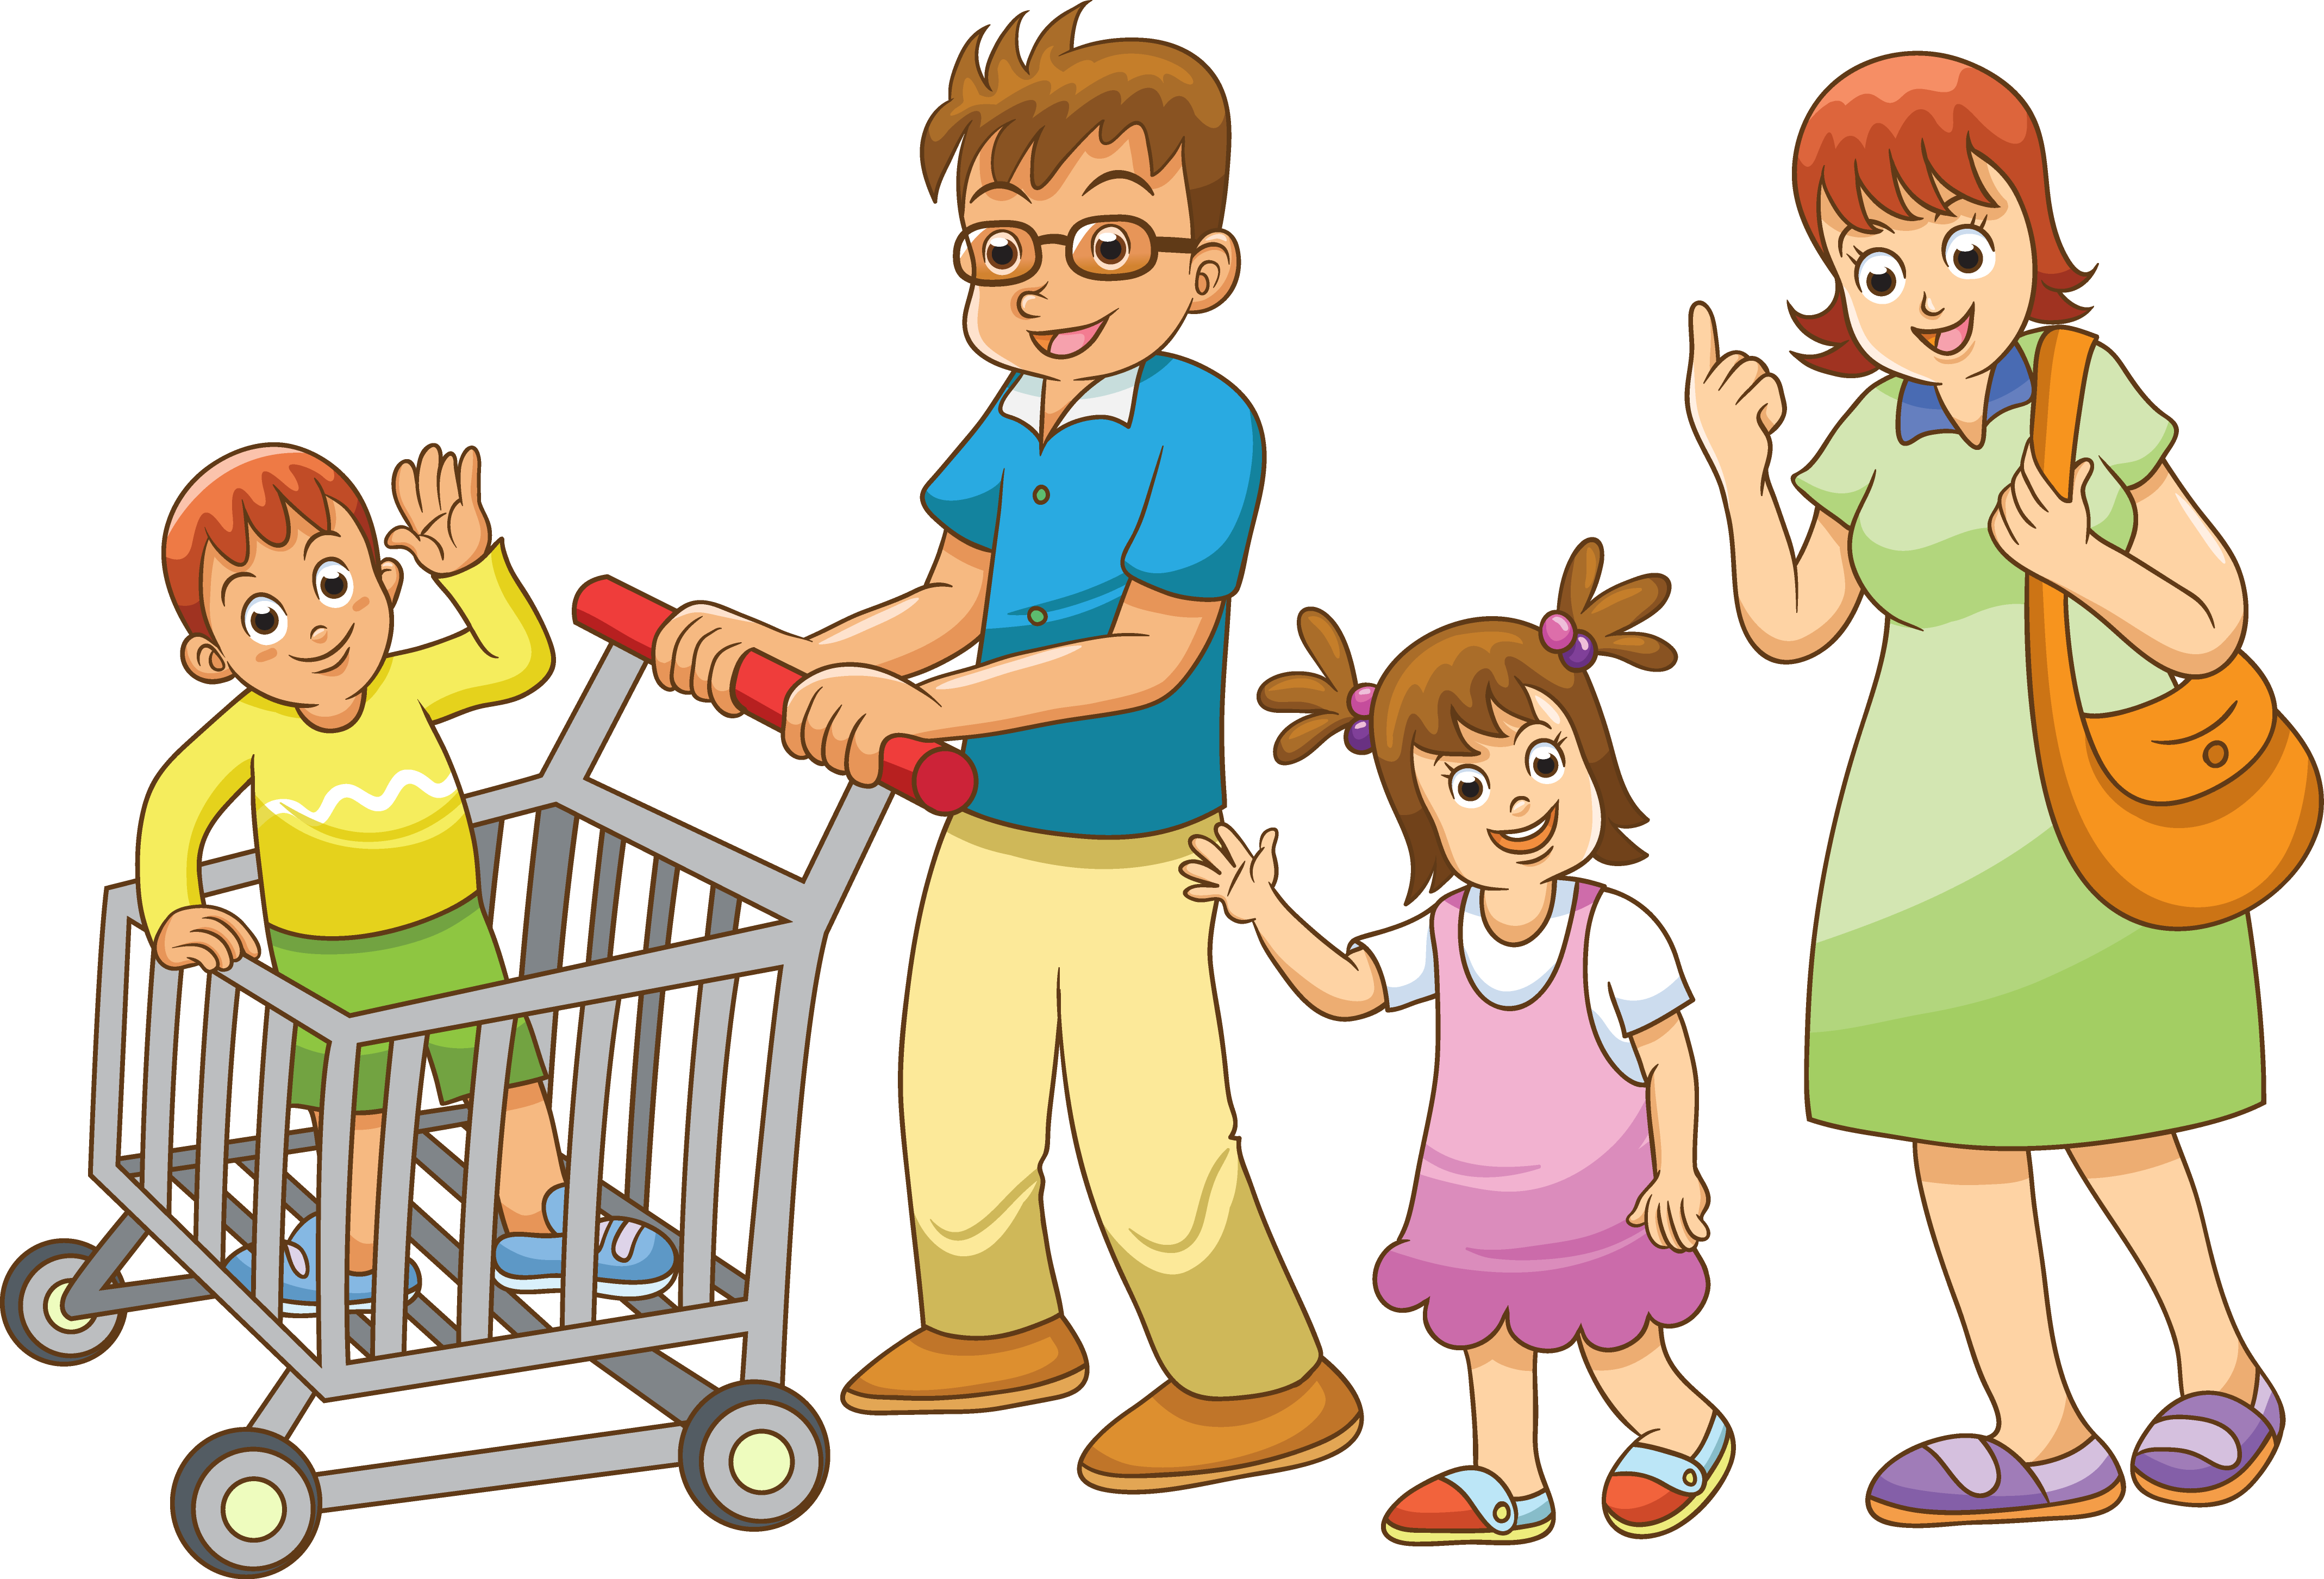 Royalty-free Shopping Family - Family Shopping Together Cartoon (4276x2906)